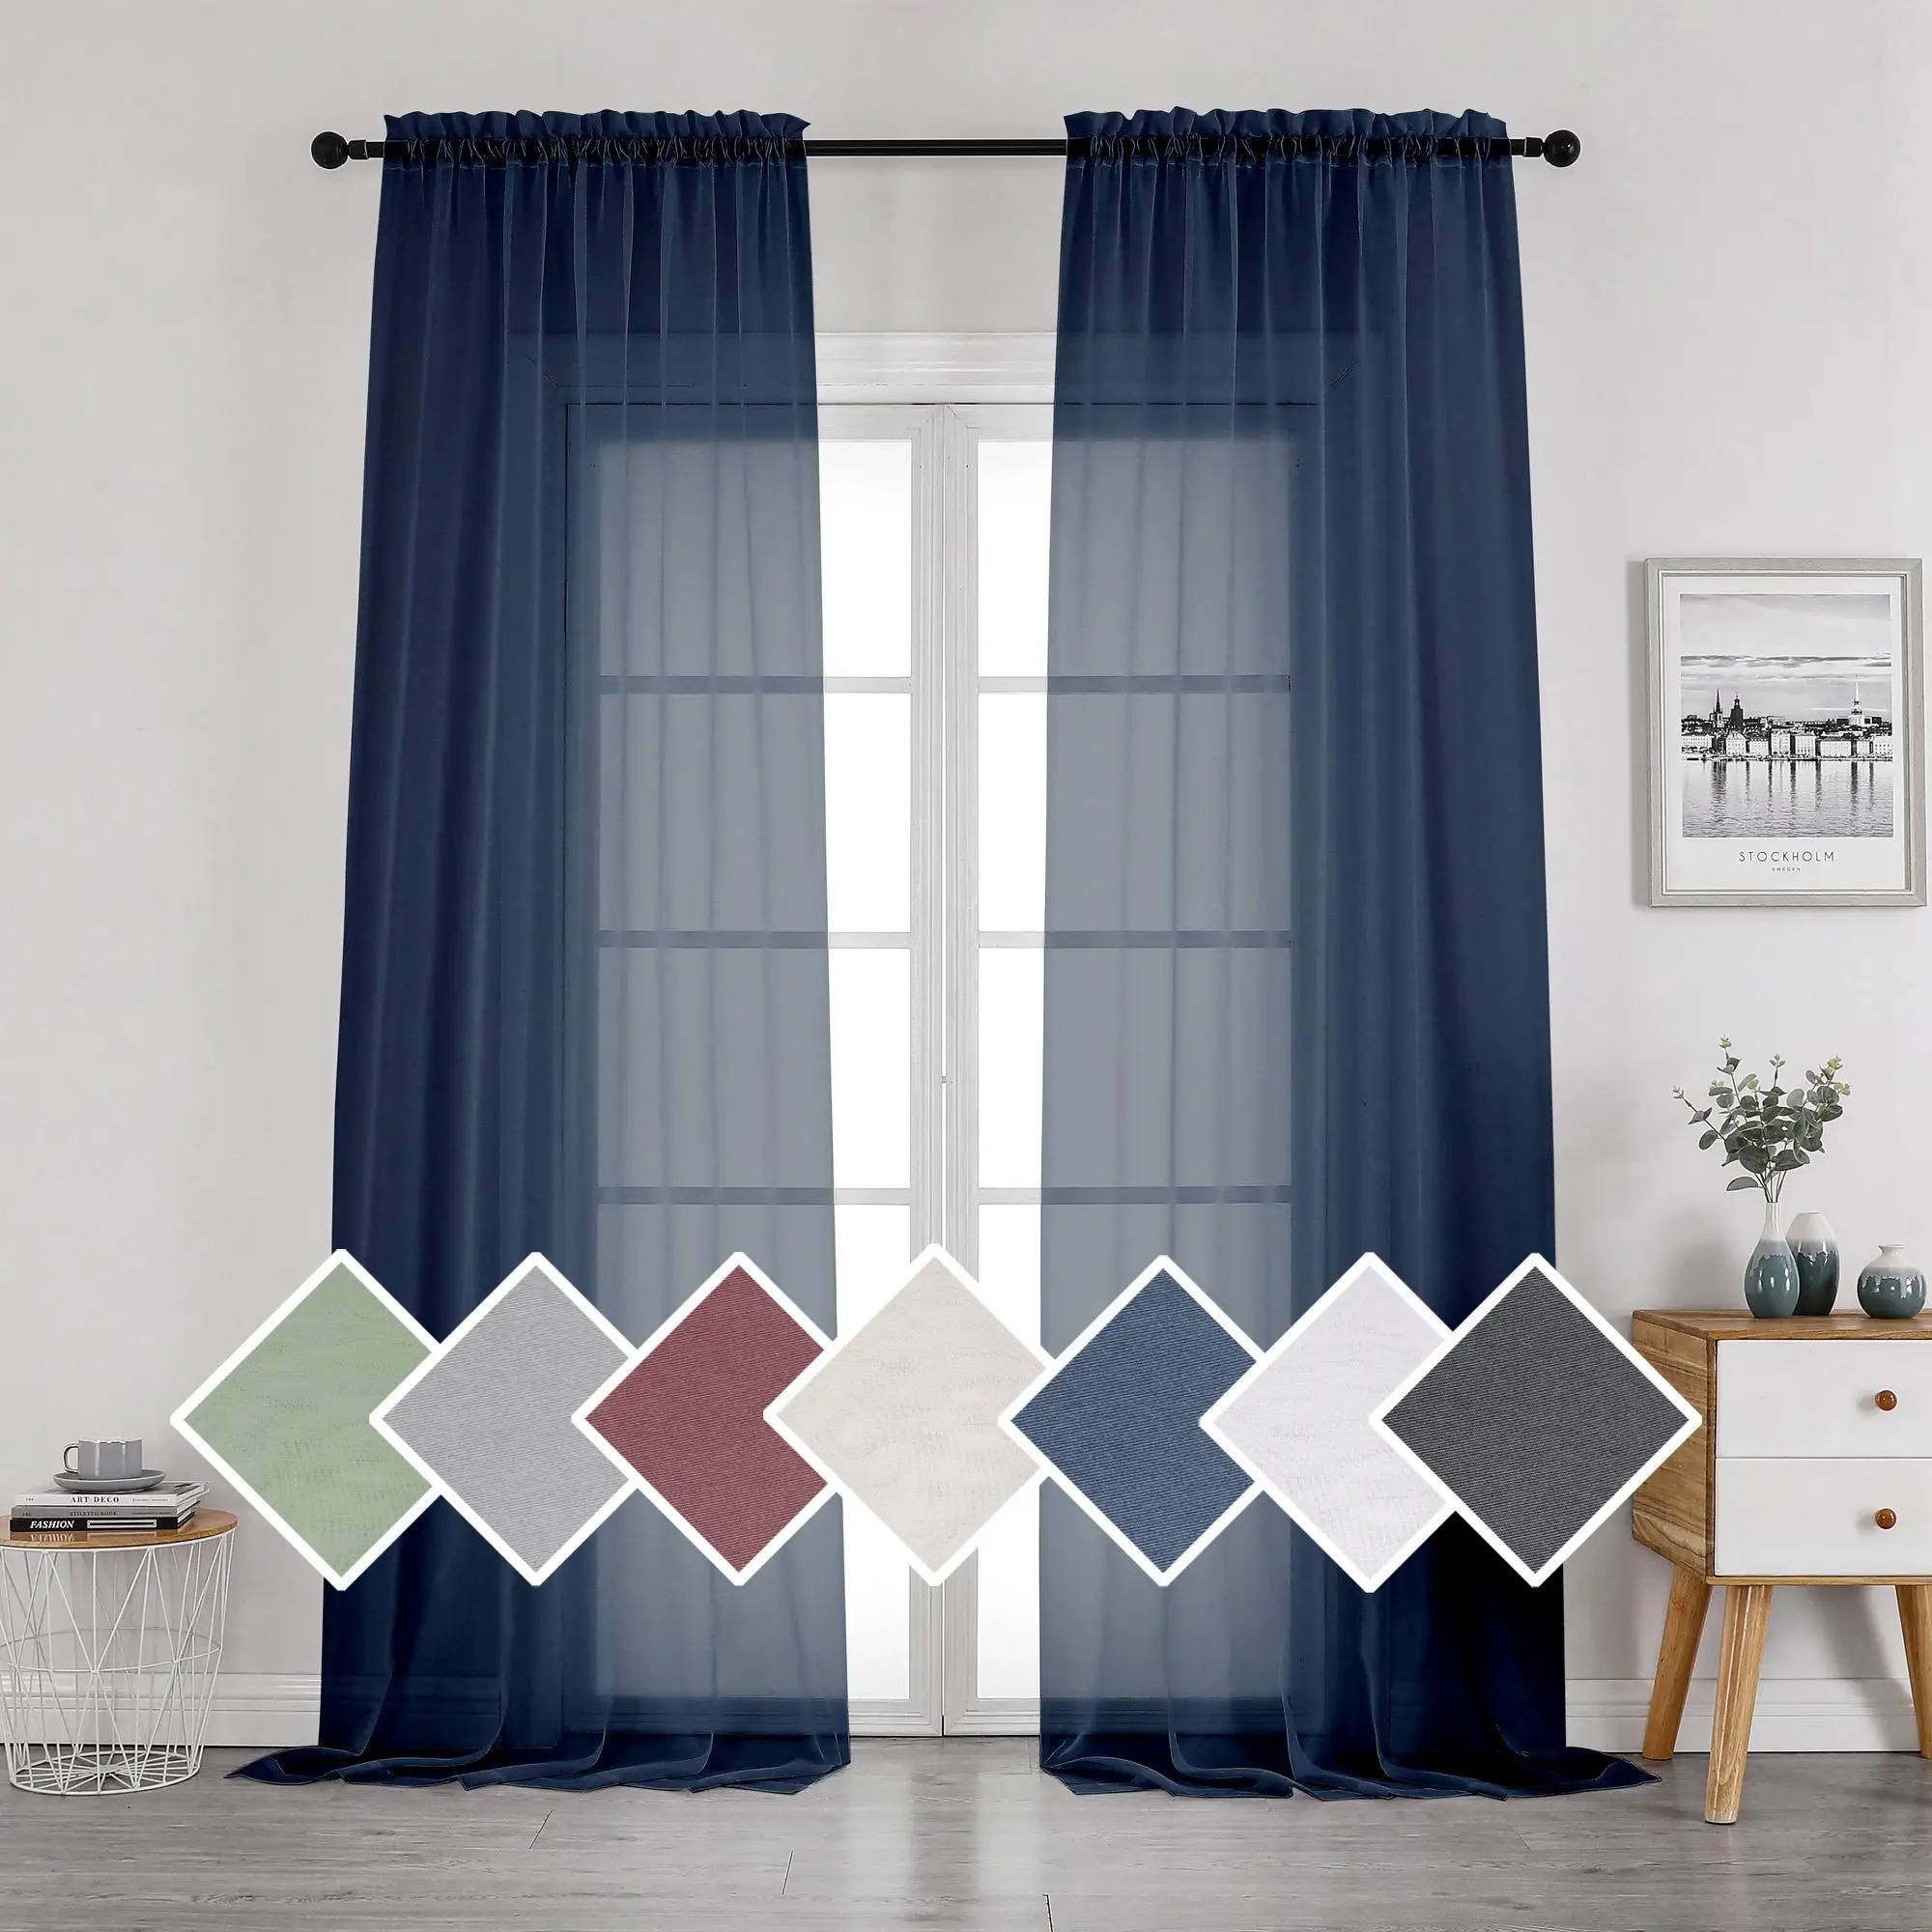 

European and American Style Voile Curtain Cloth Navy Blue OWENIE Ready Made Navy Blue Sheer Window Curtain Living Room